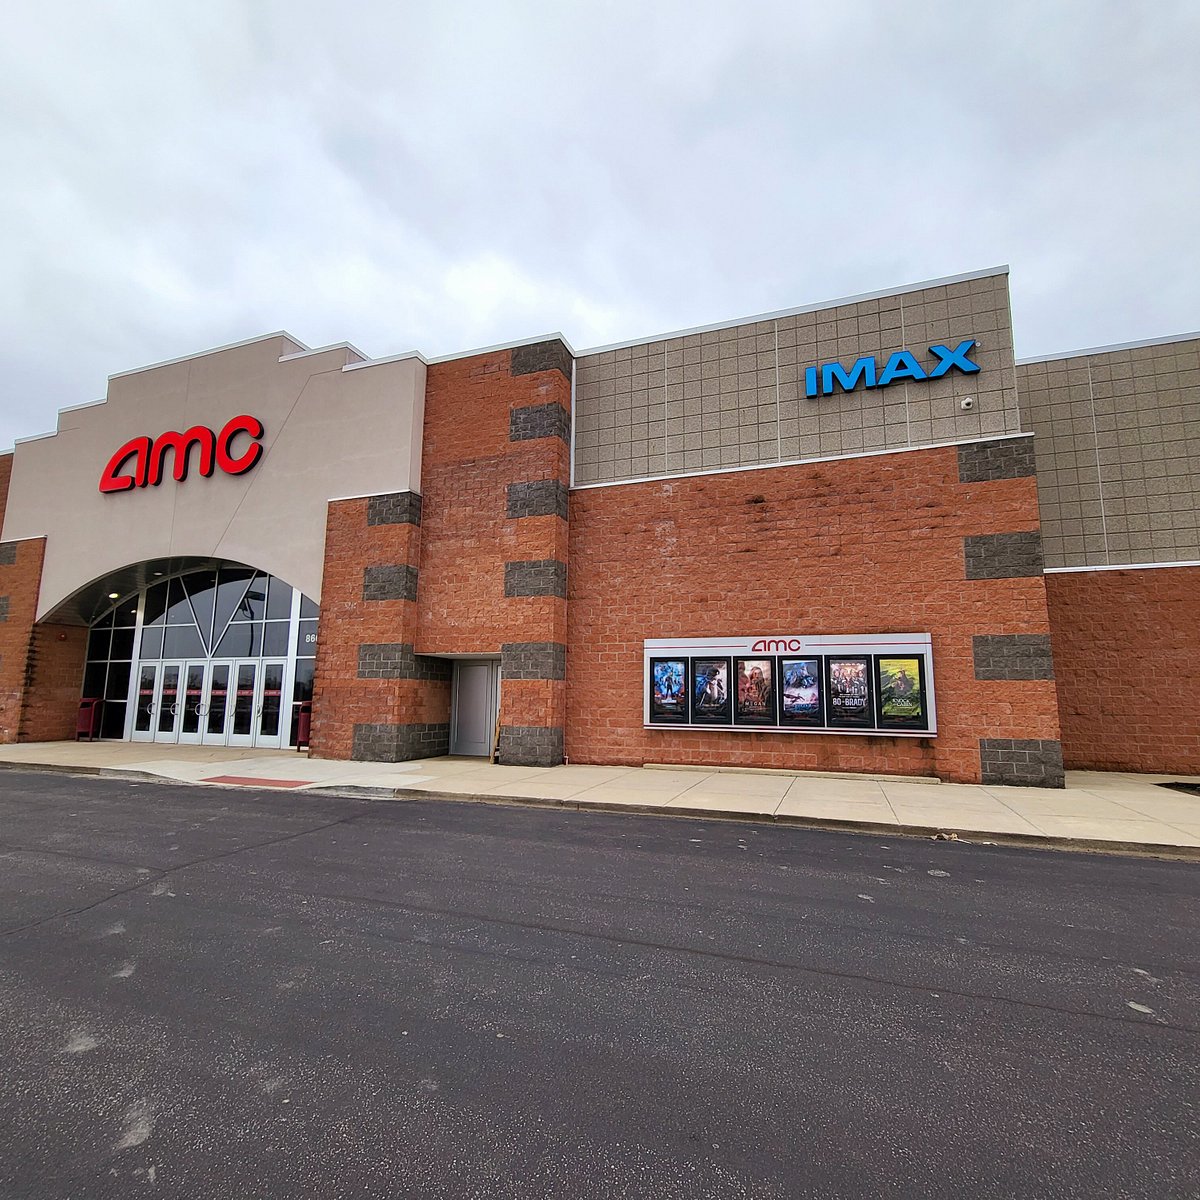 Fort Wayne movie theater requires kids to be with adult